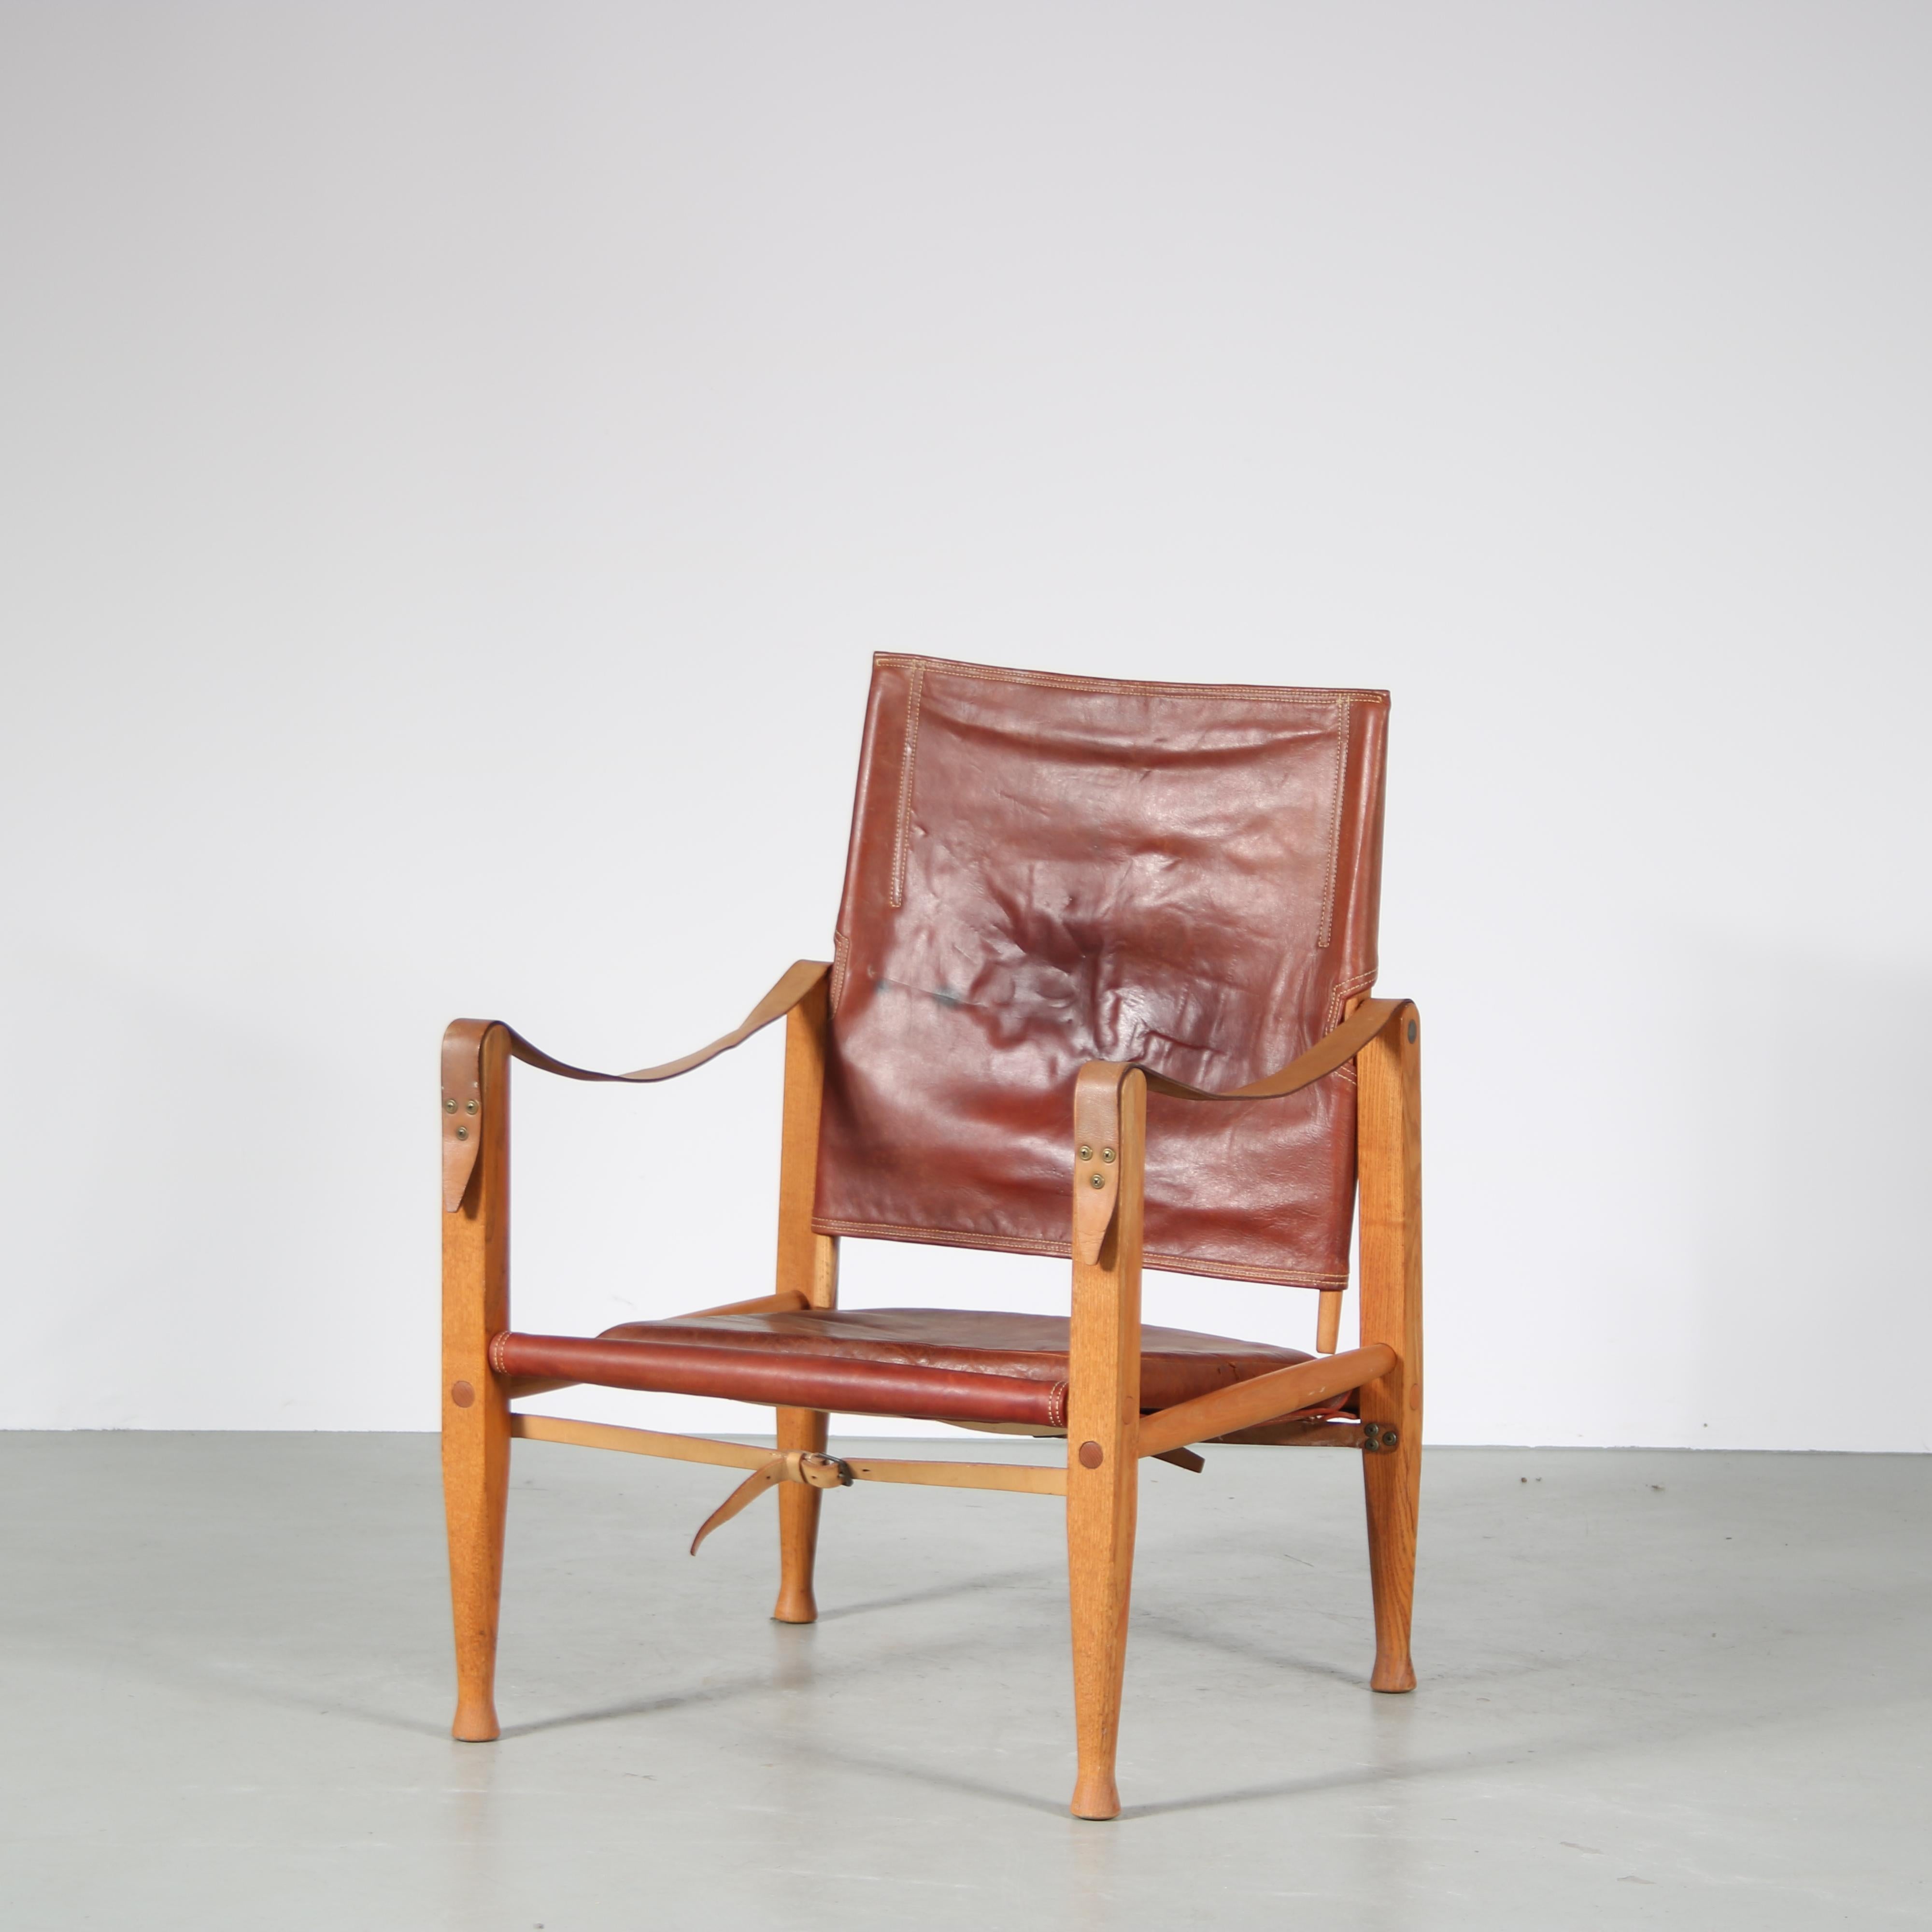 A beautiful “Safari” lounge chair designed by Kaare Klint, manufactured by Rud Rasmussen in Denmark around 1950.

This eye-catching chair has a wonderful oak wooden frame in a nice, natural brown colour. The seat and back are made of high quality,